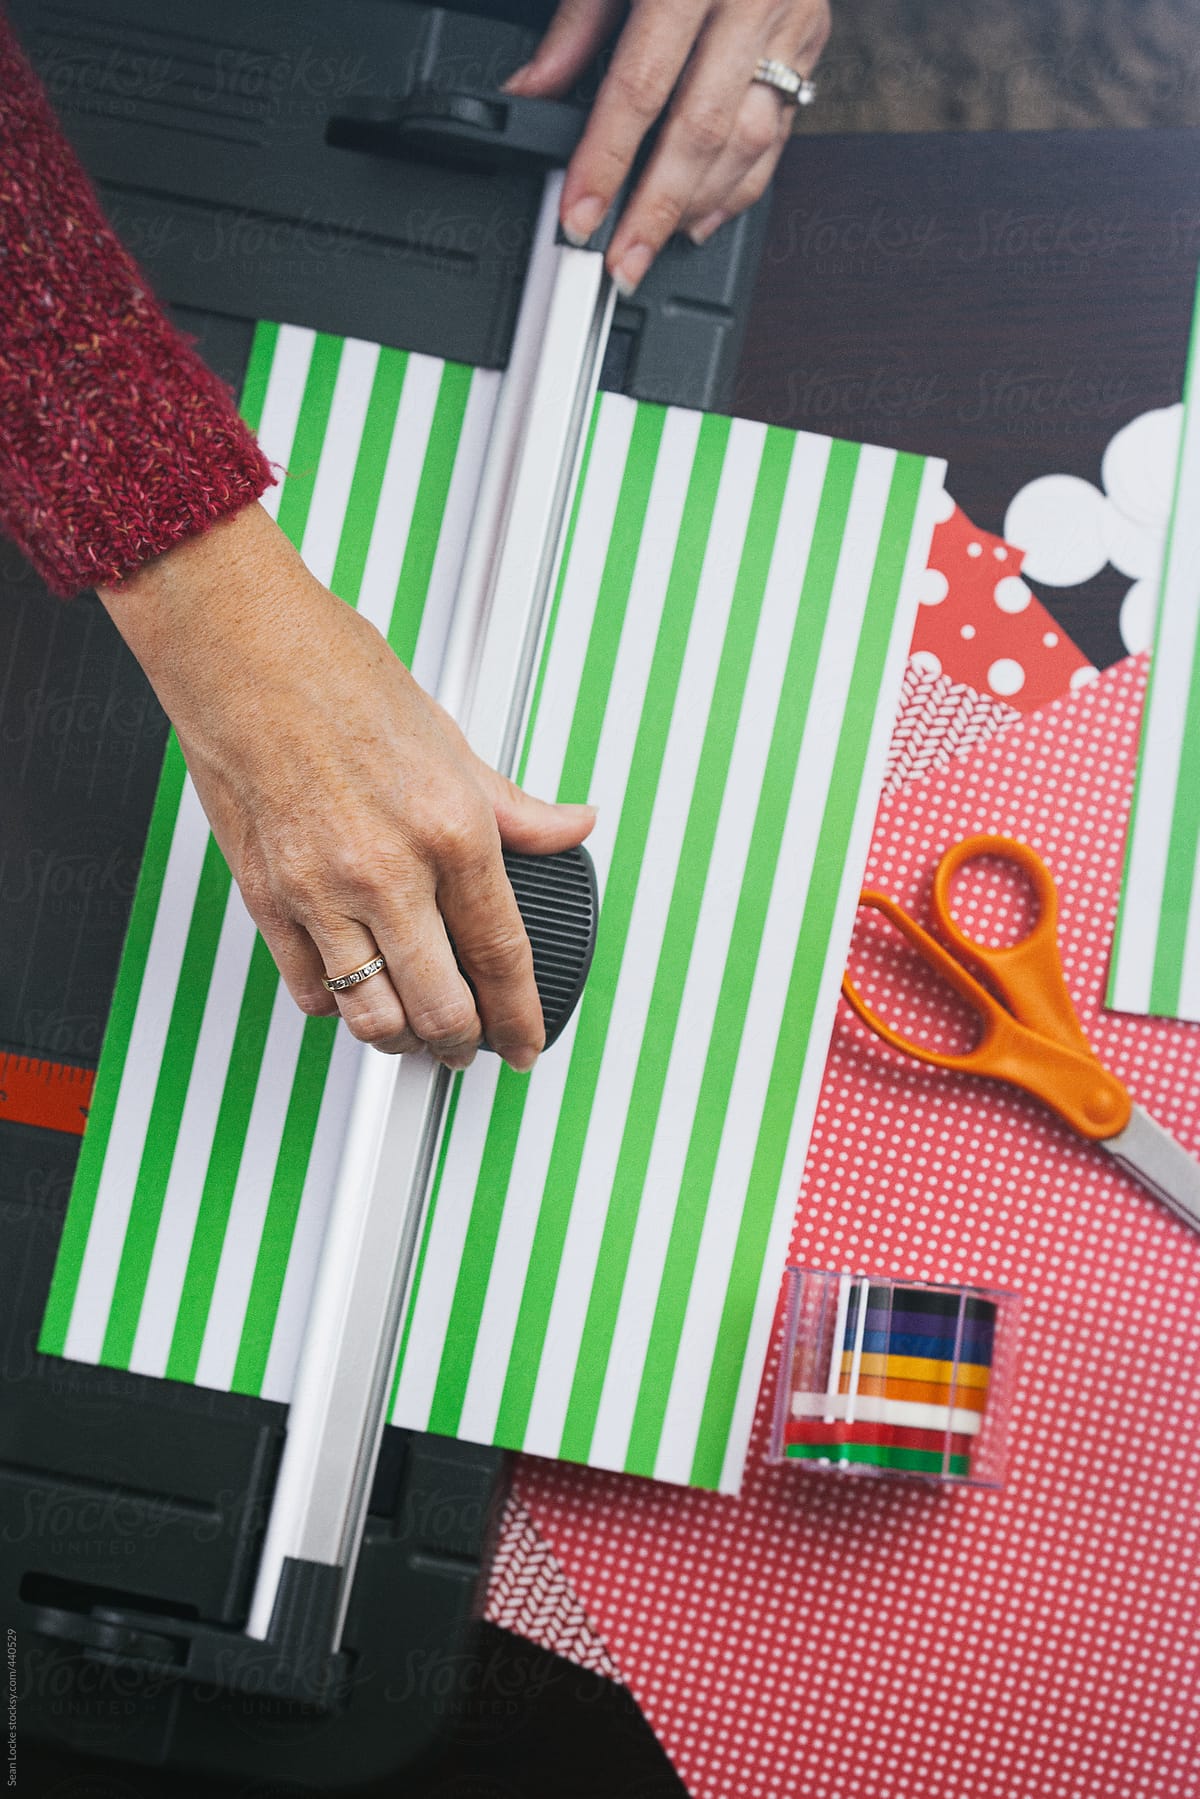 Countdown: Woman Uses Paper Cutter To Slice Patterned Paper